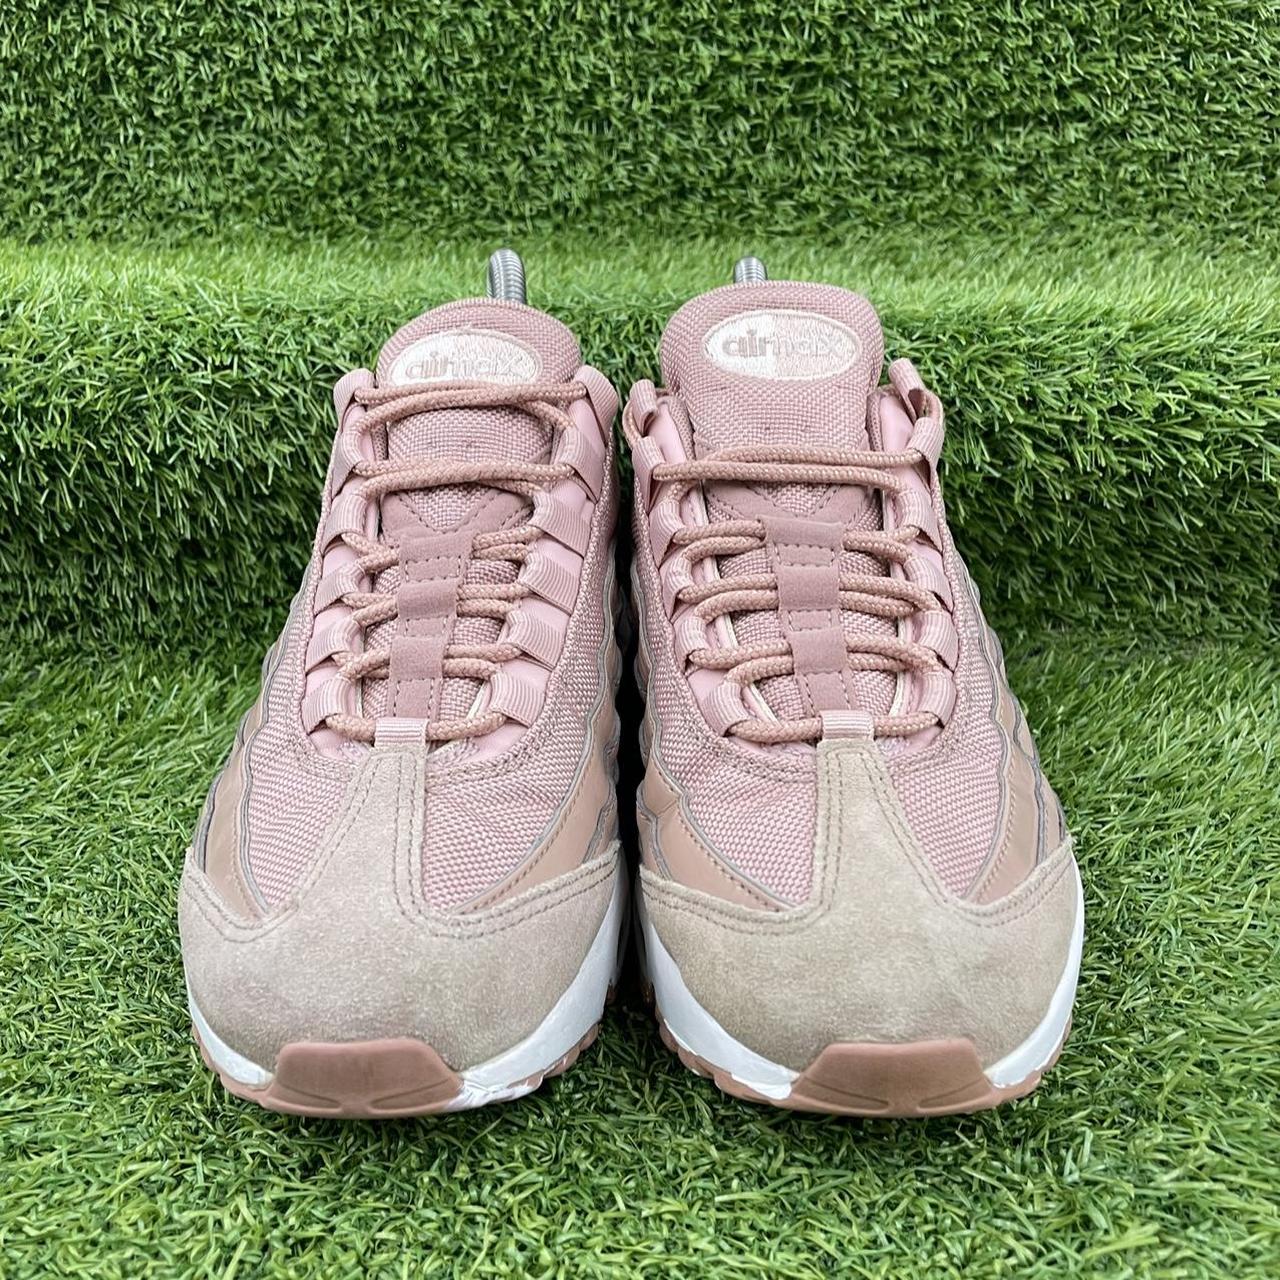 Nike Air Max 95 Particle Pink Trainers Size UK... - Depop